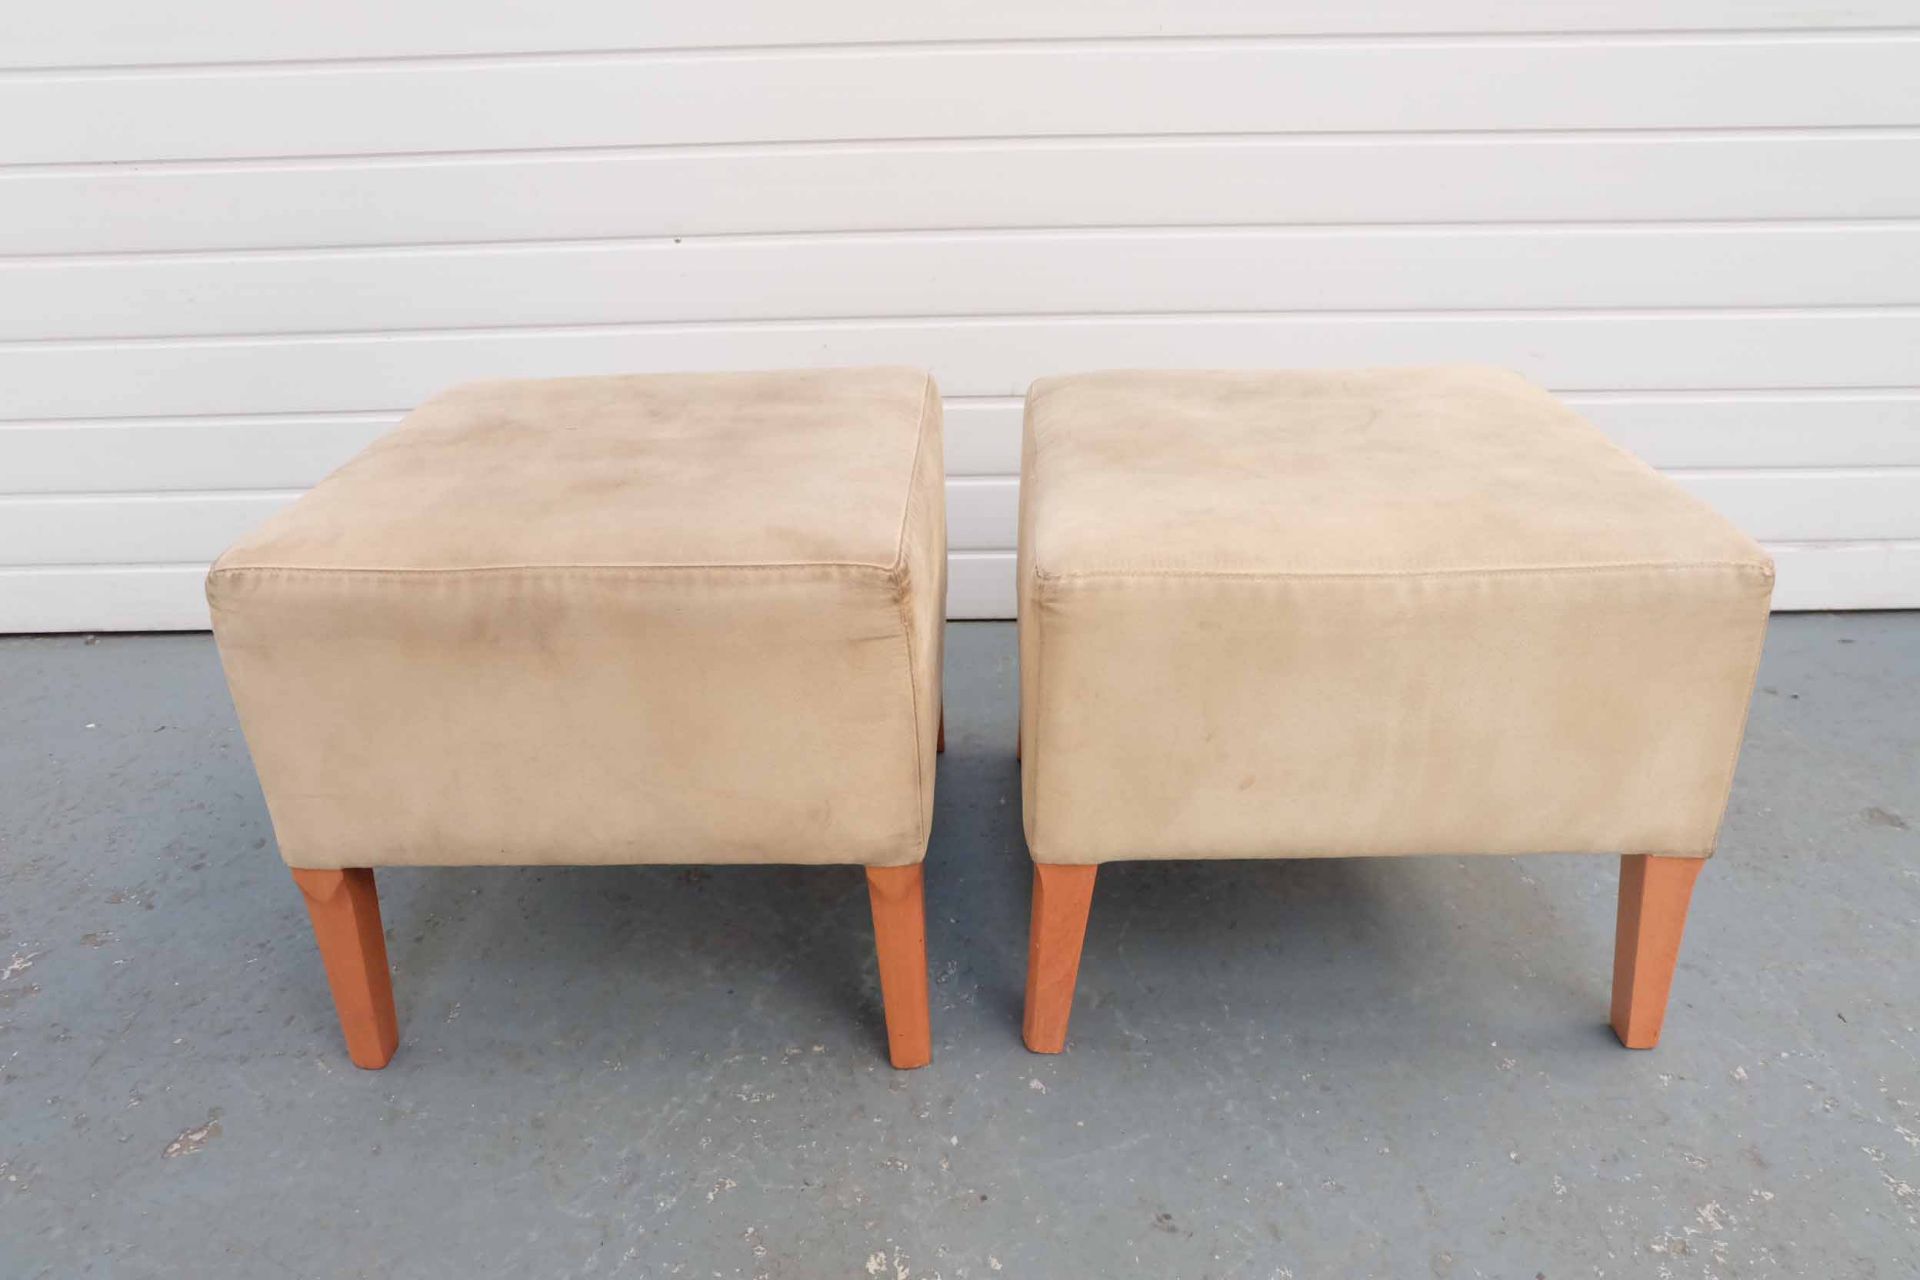 Pair of Occasional Use Art Deco Tub Style Chair Footstools.